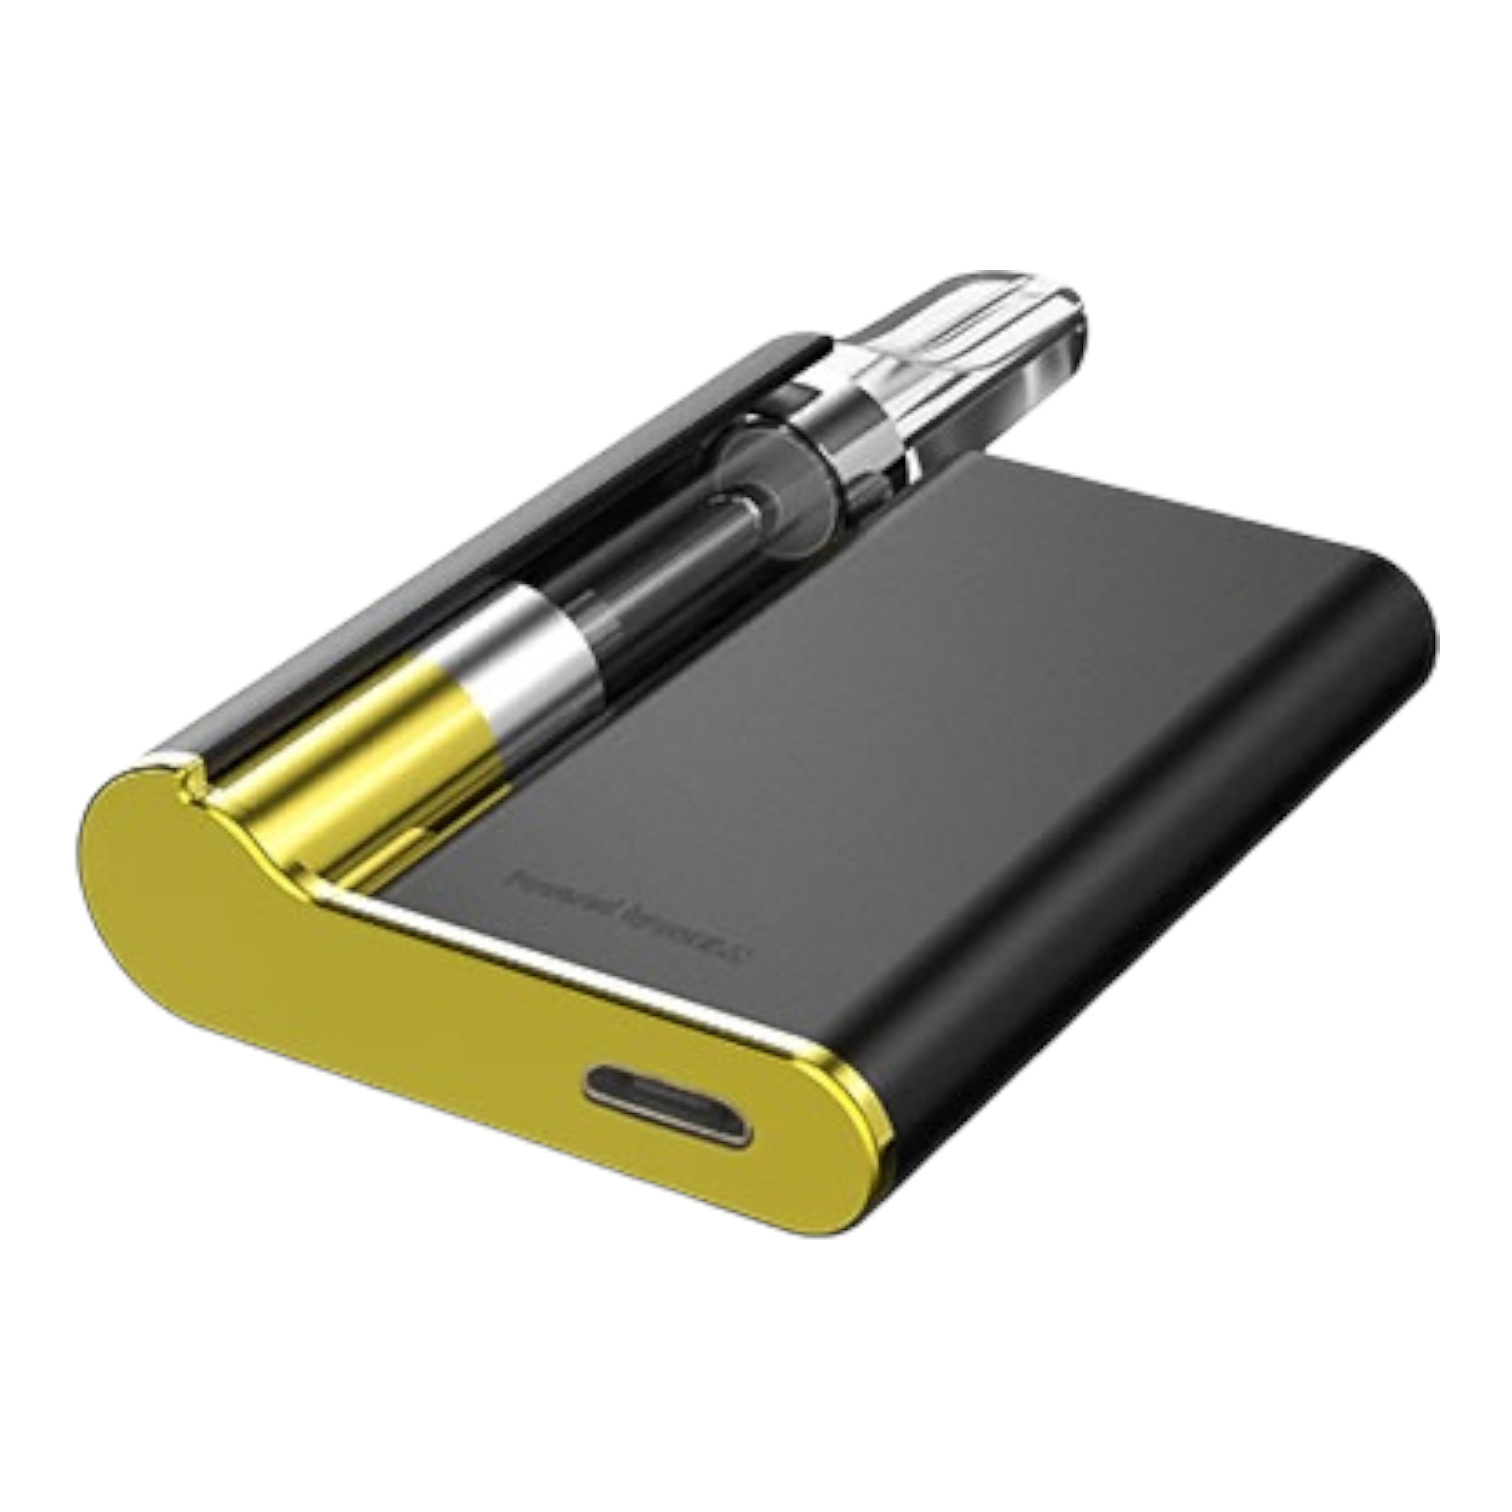 CCELL - Palm Battery - Black & Yellow